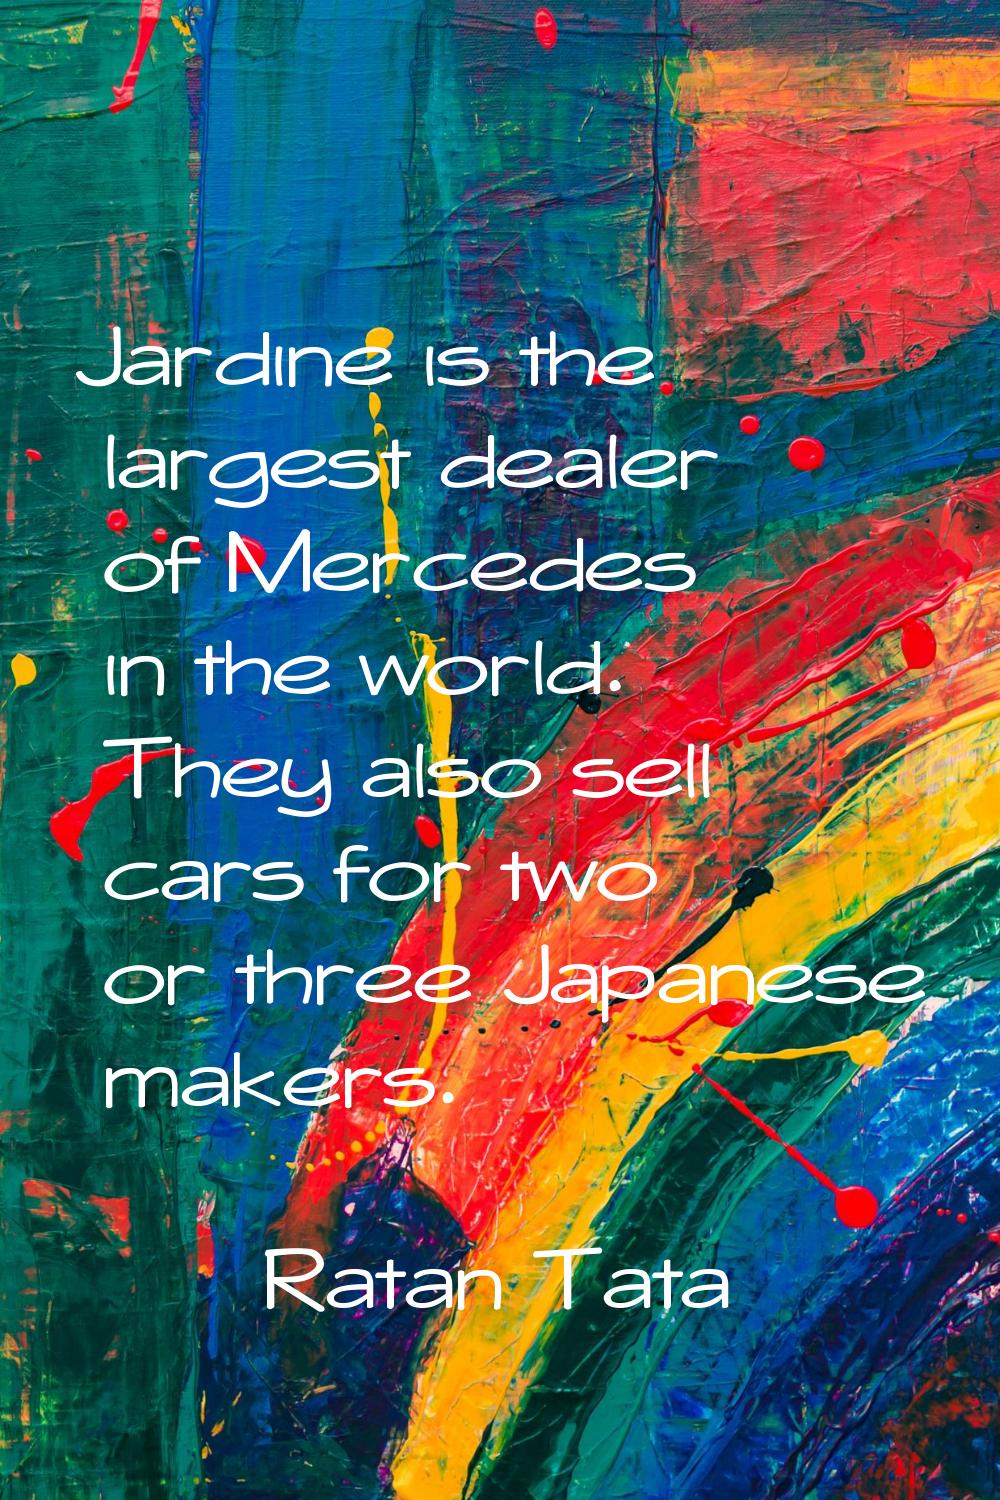 Jardine is the largest dealer of Mercedes in the world. They also sell cars for two or three Japane